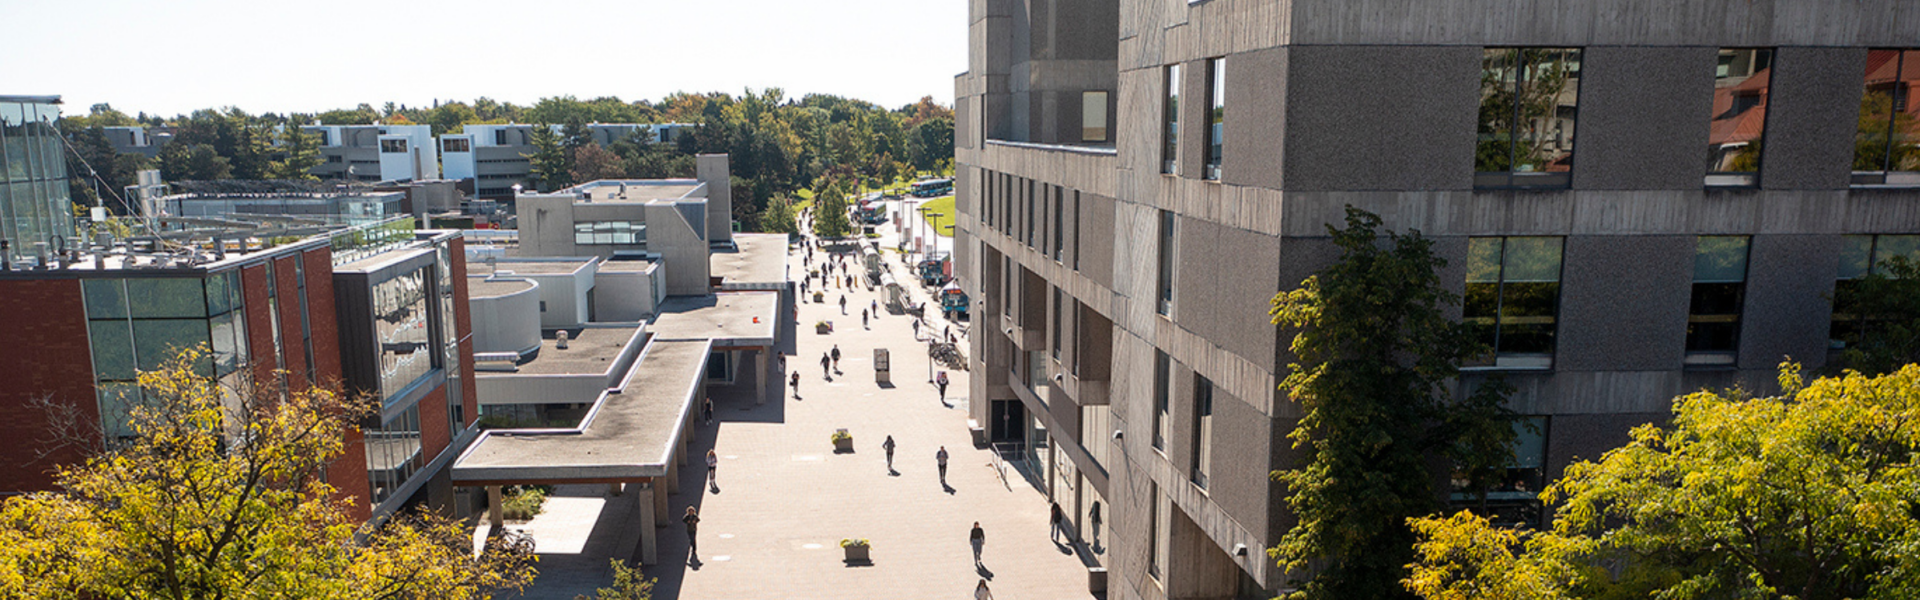 Aerial view of Winegard Walk on the University of Guelph campus, with students walking down the path.